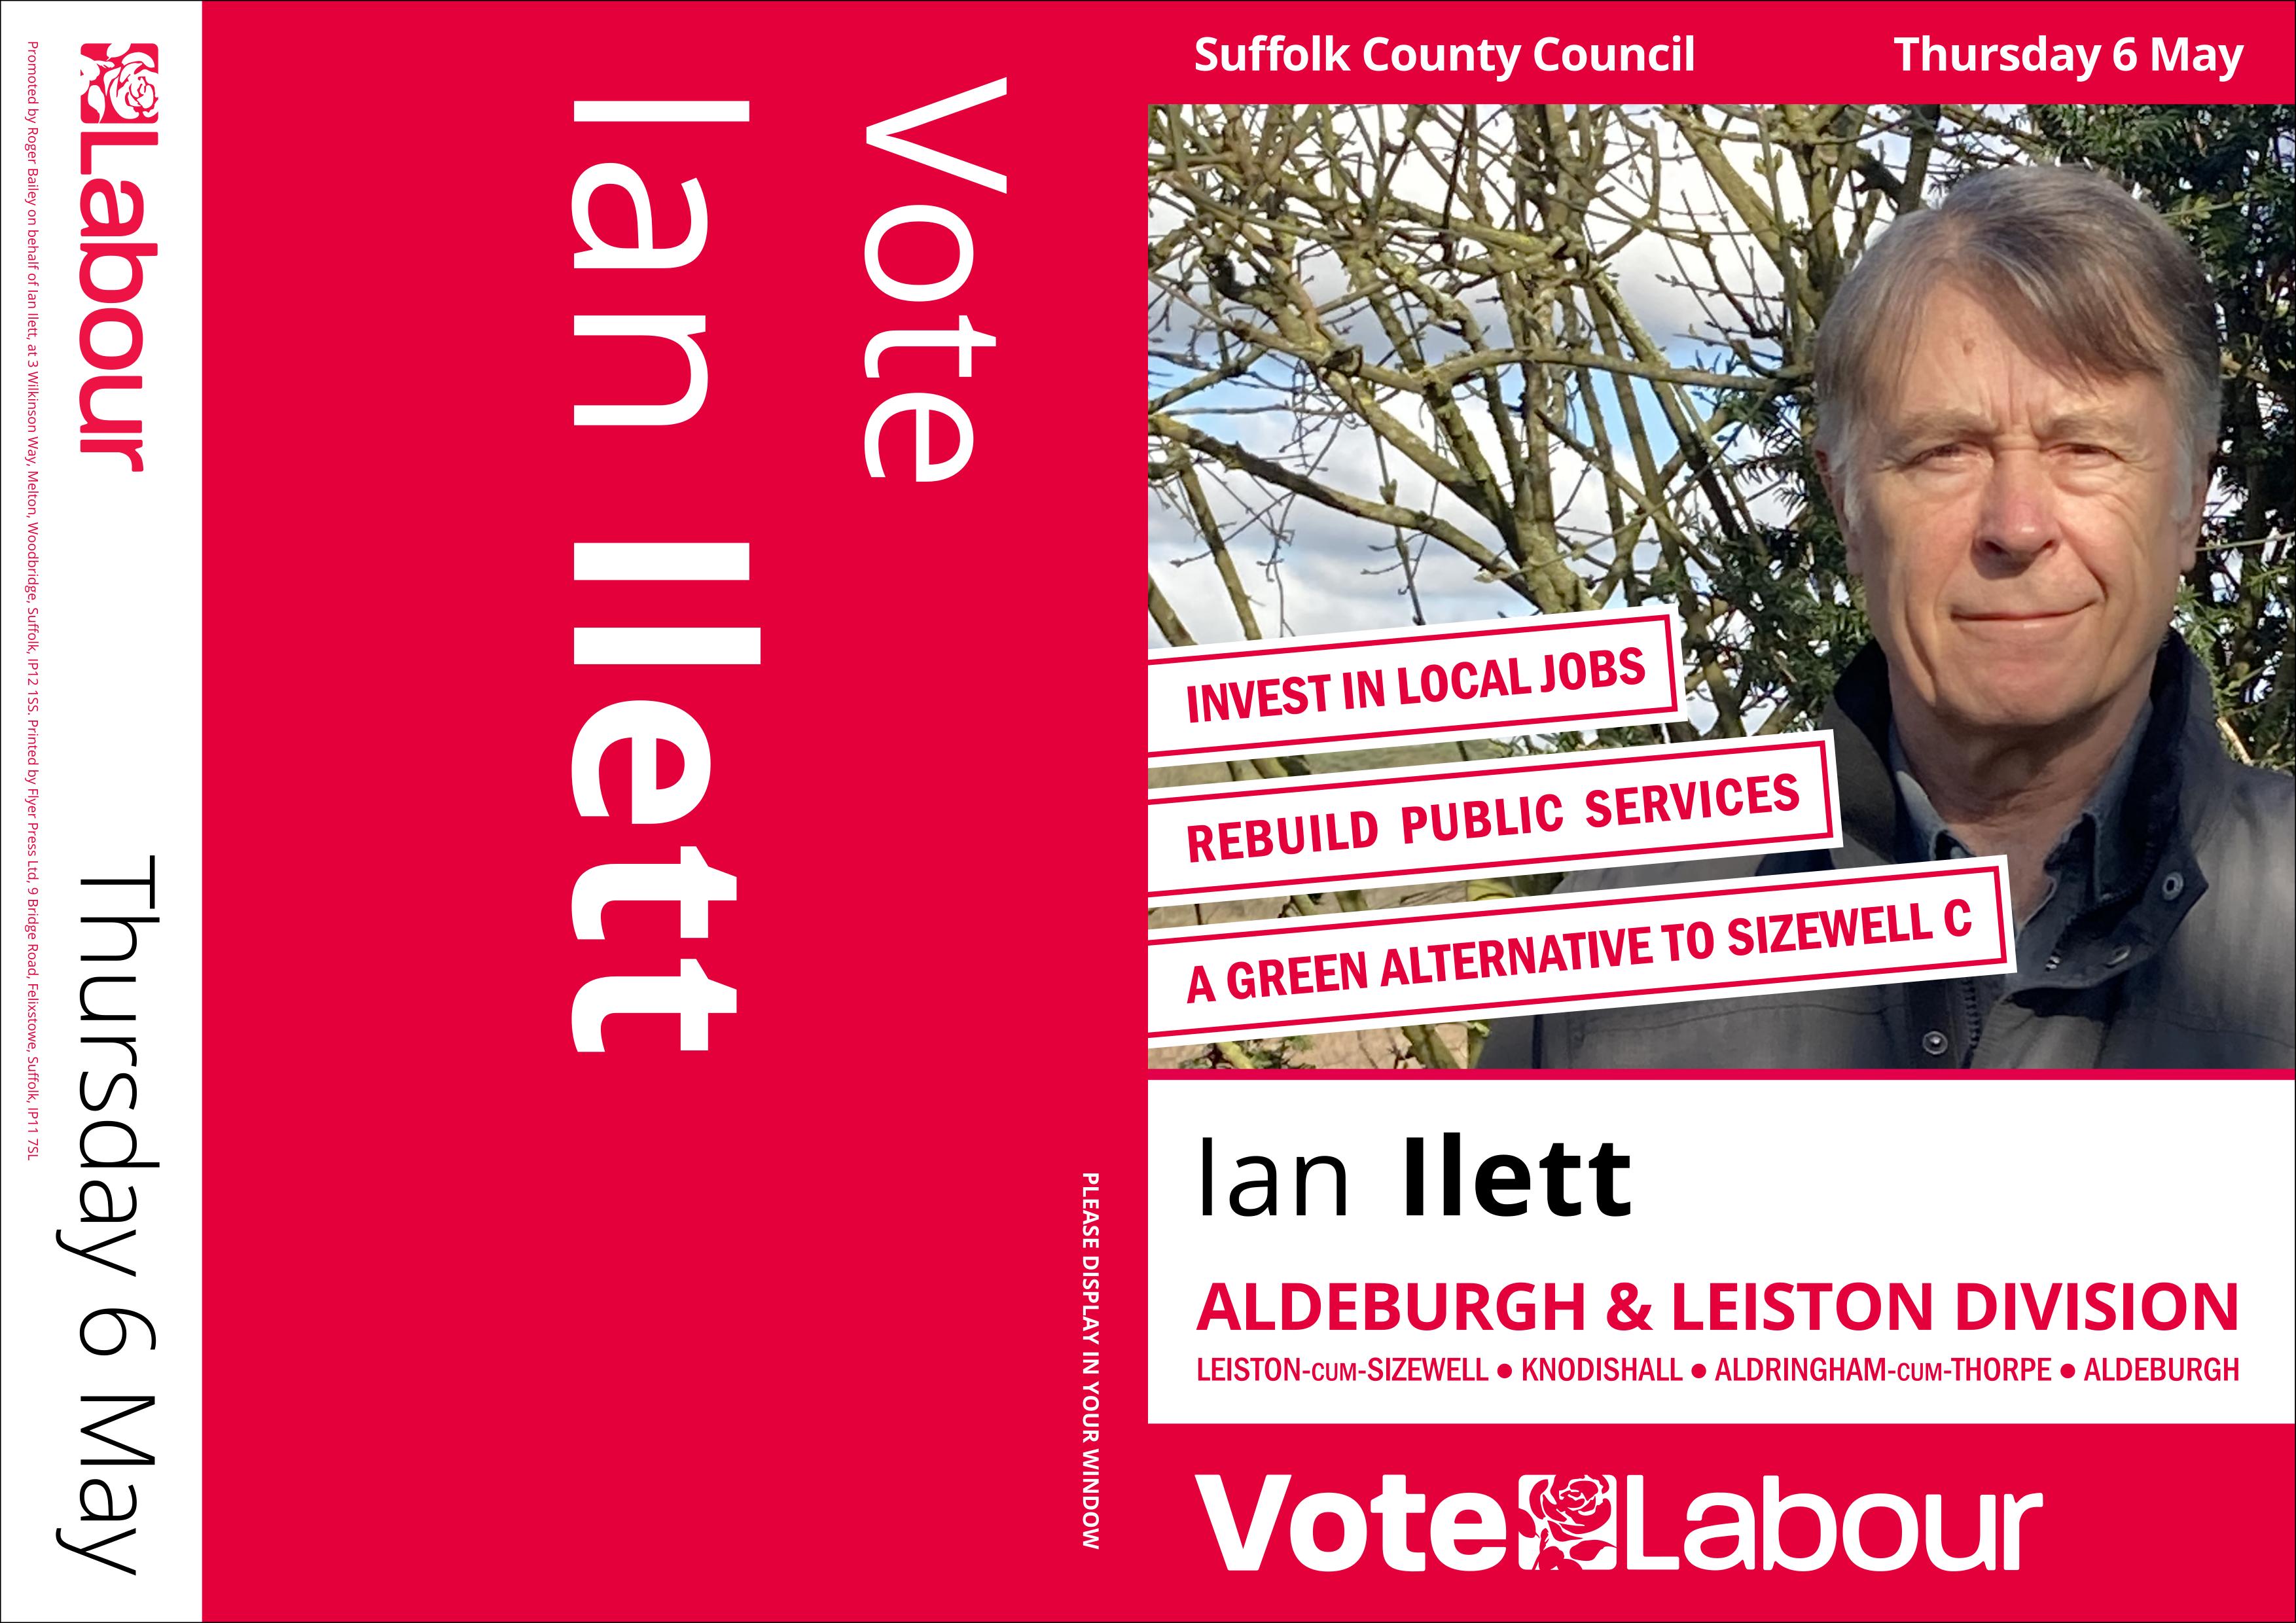 Ian Ilett election leaflet Aldeburgh and Leiston division - front and back pages